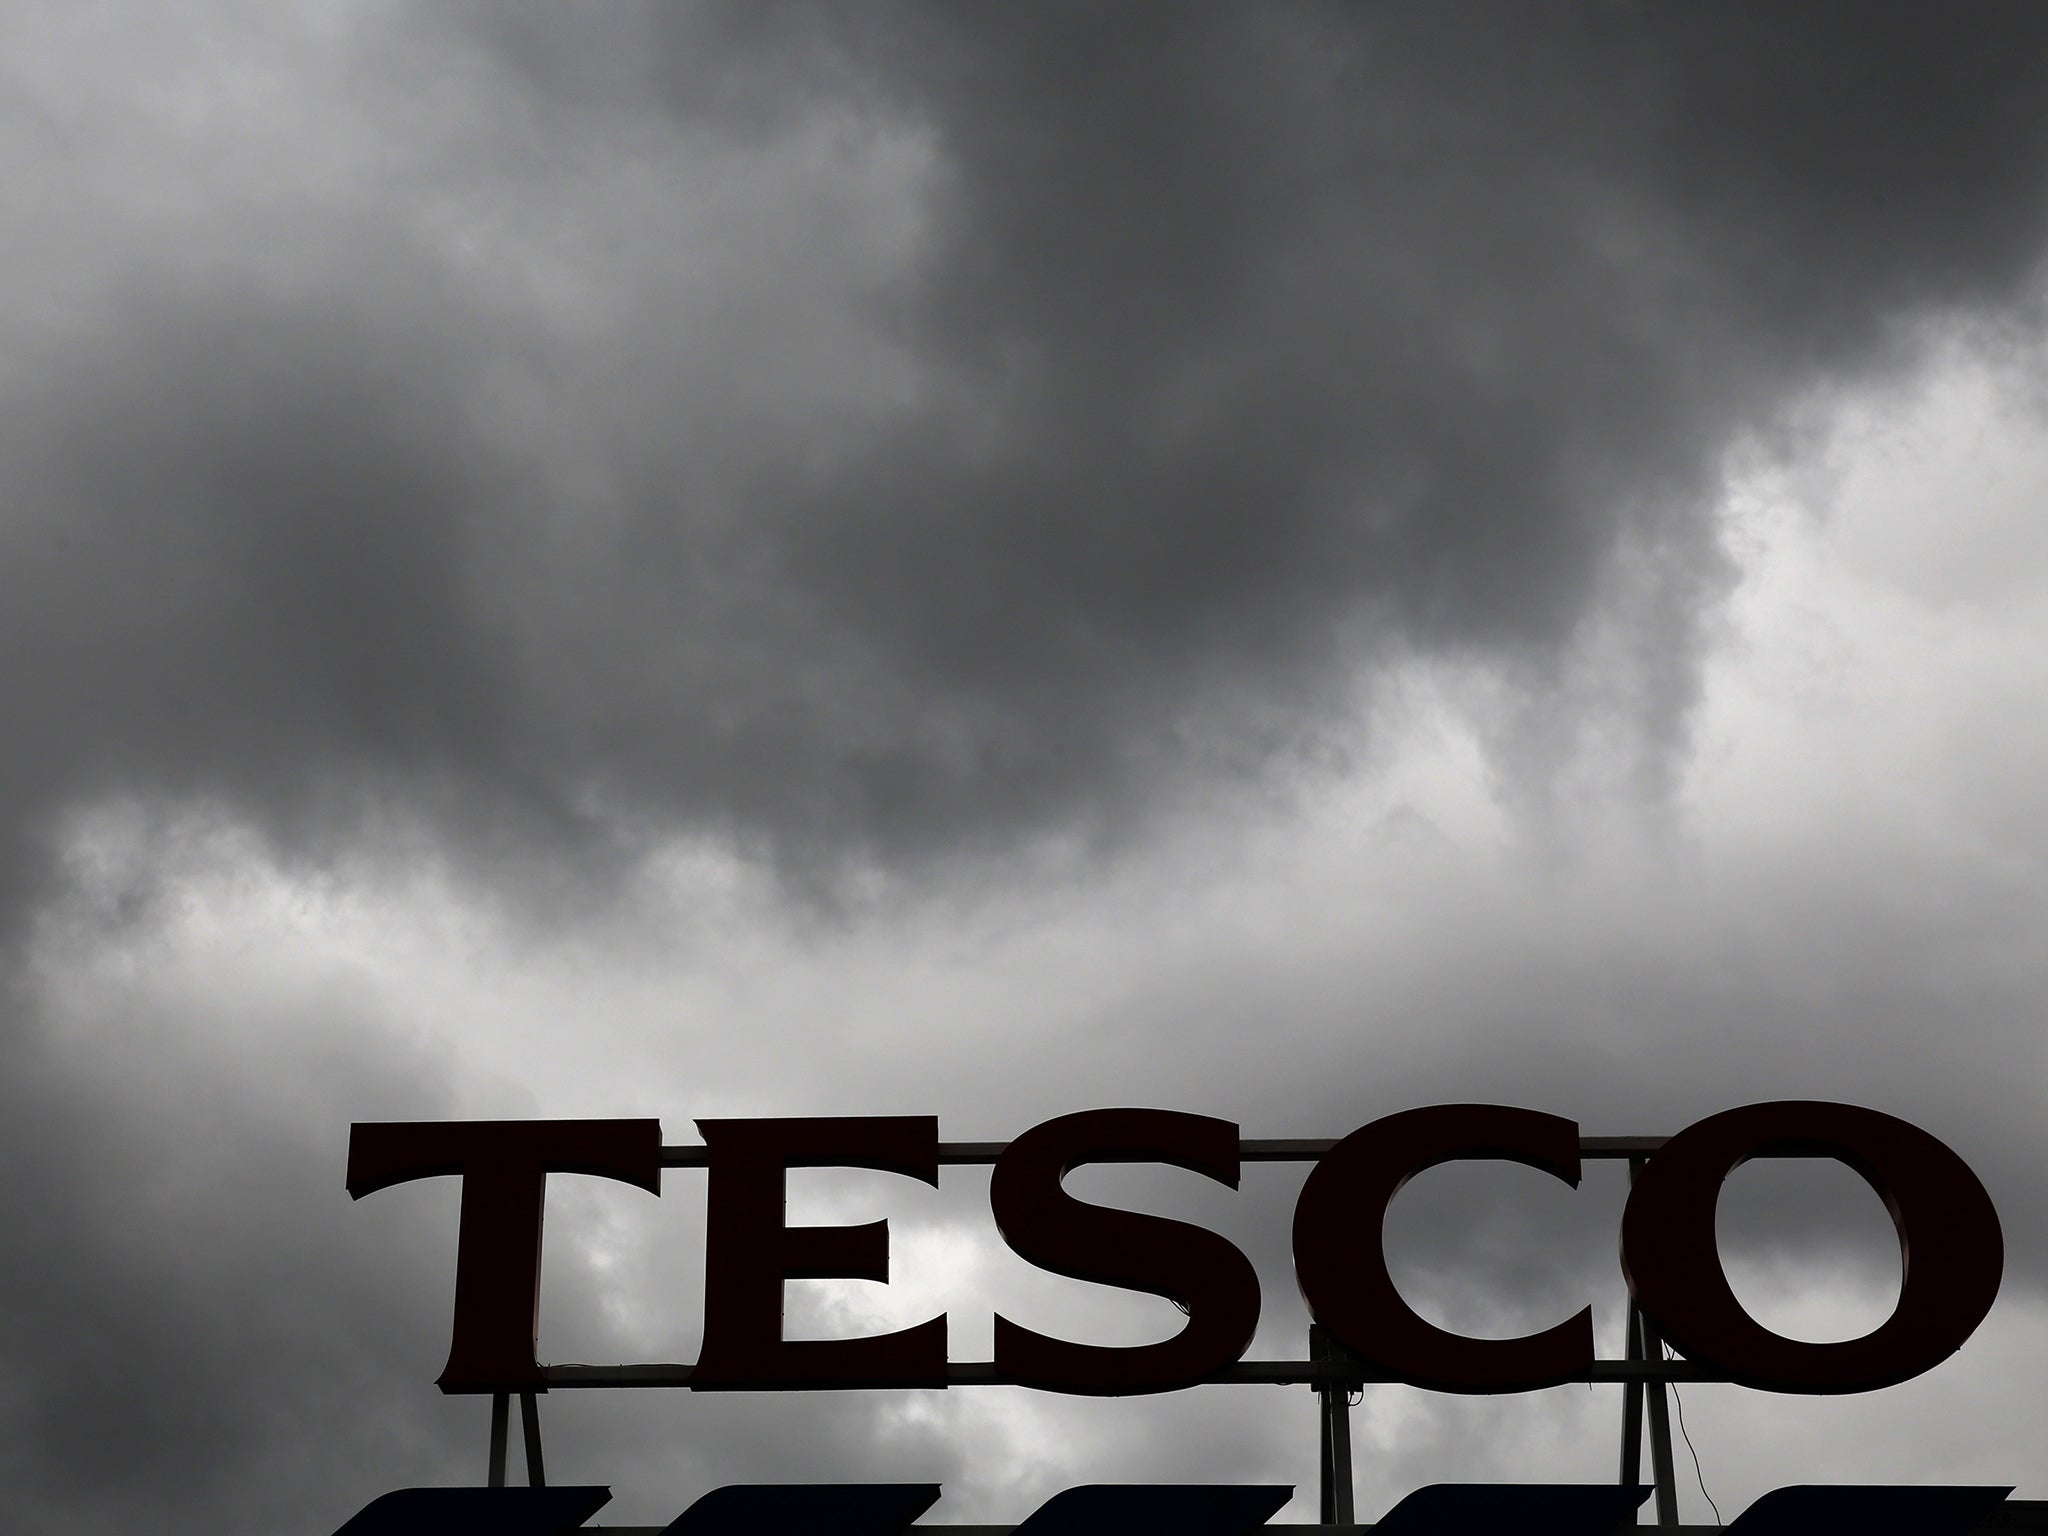 Tesco has more than £8bn of debt on its books